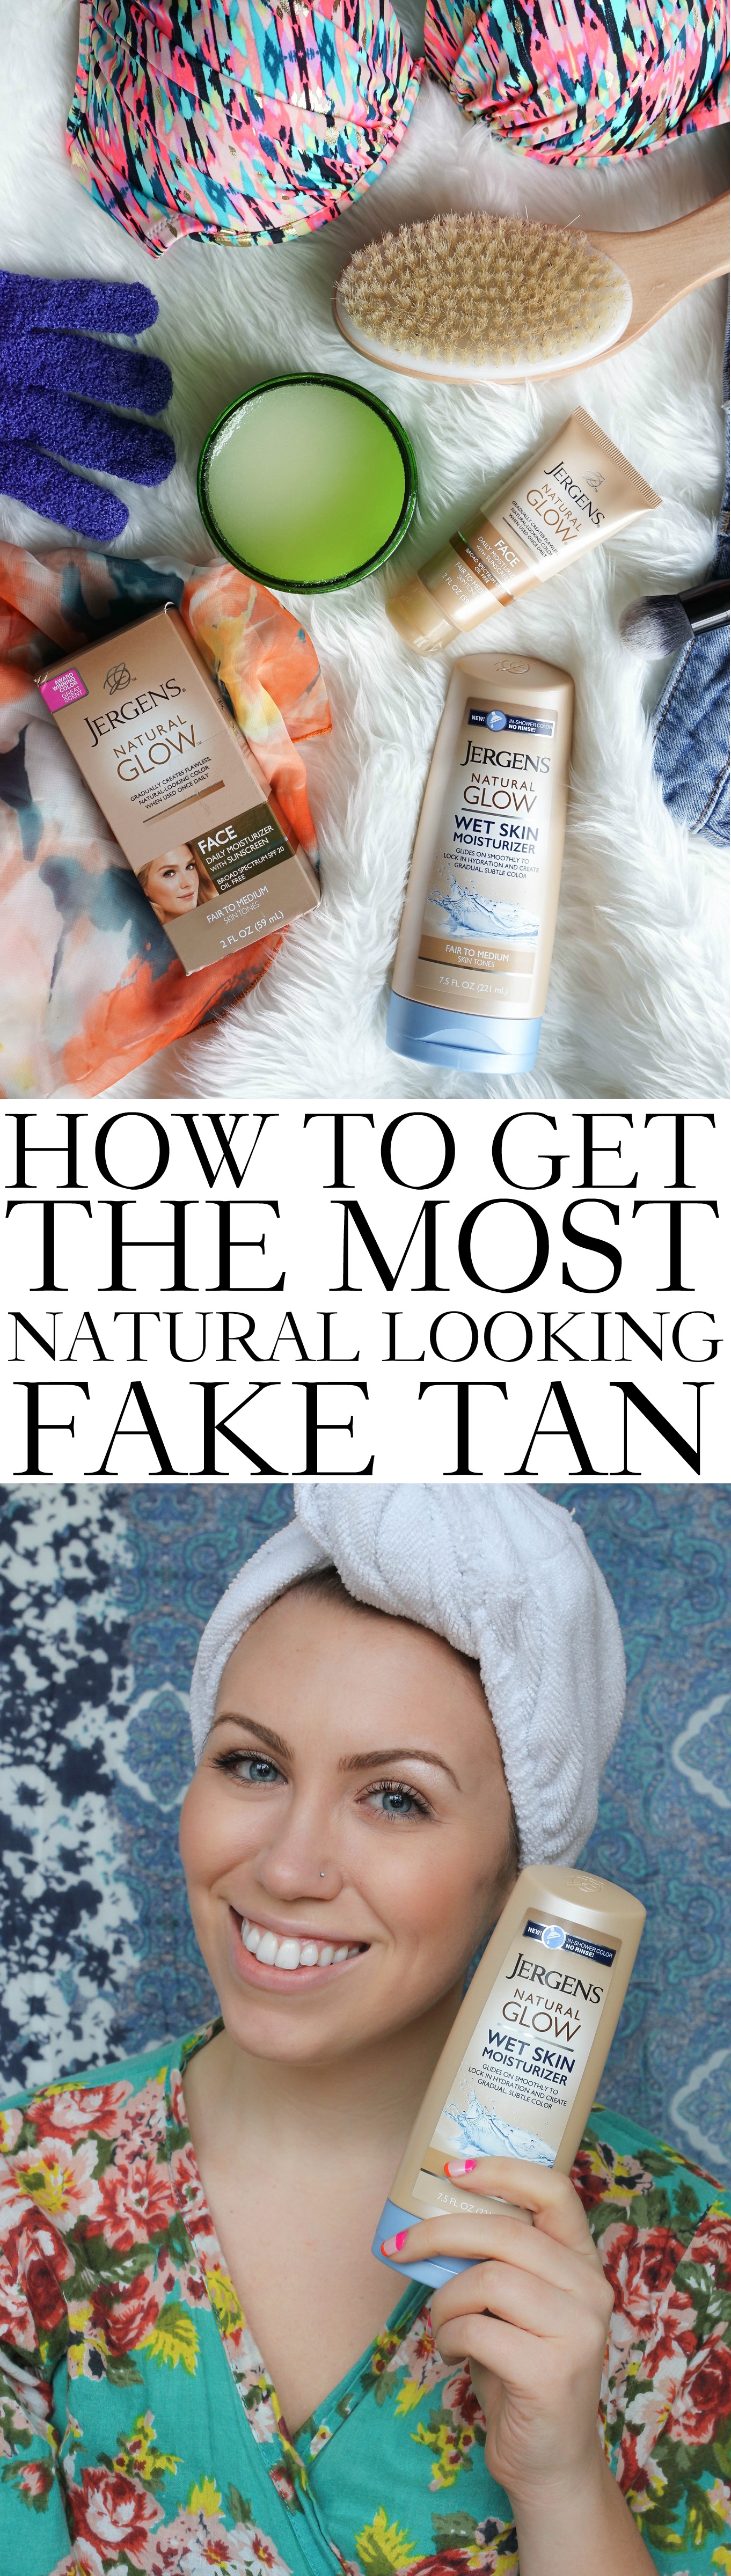 How to Get the Most Natural Looking Fake Tan with Jergens